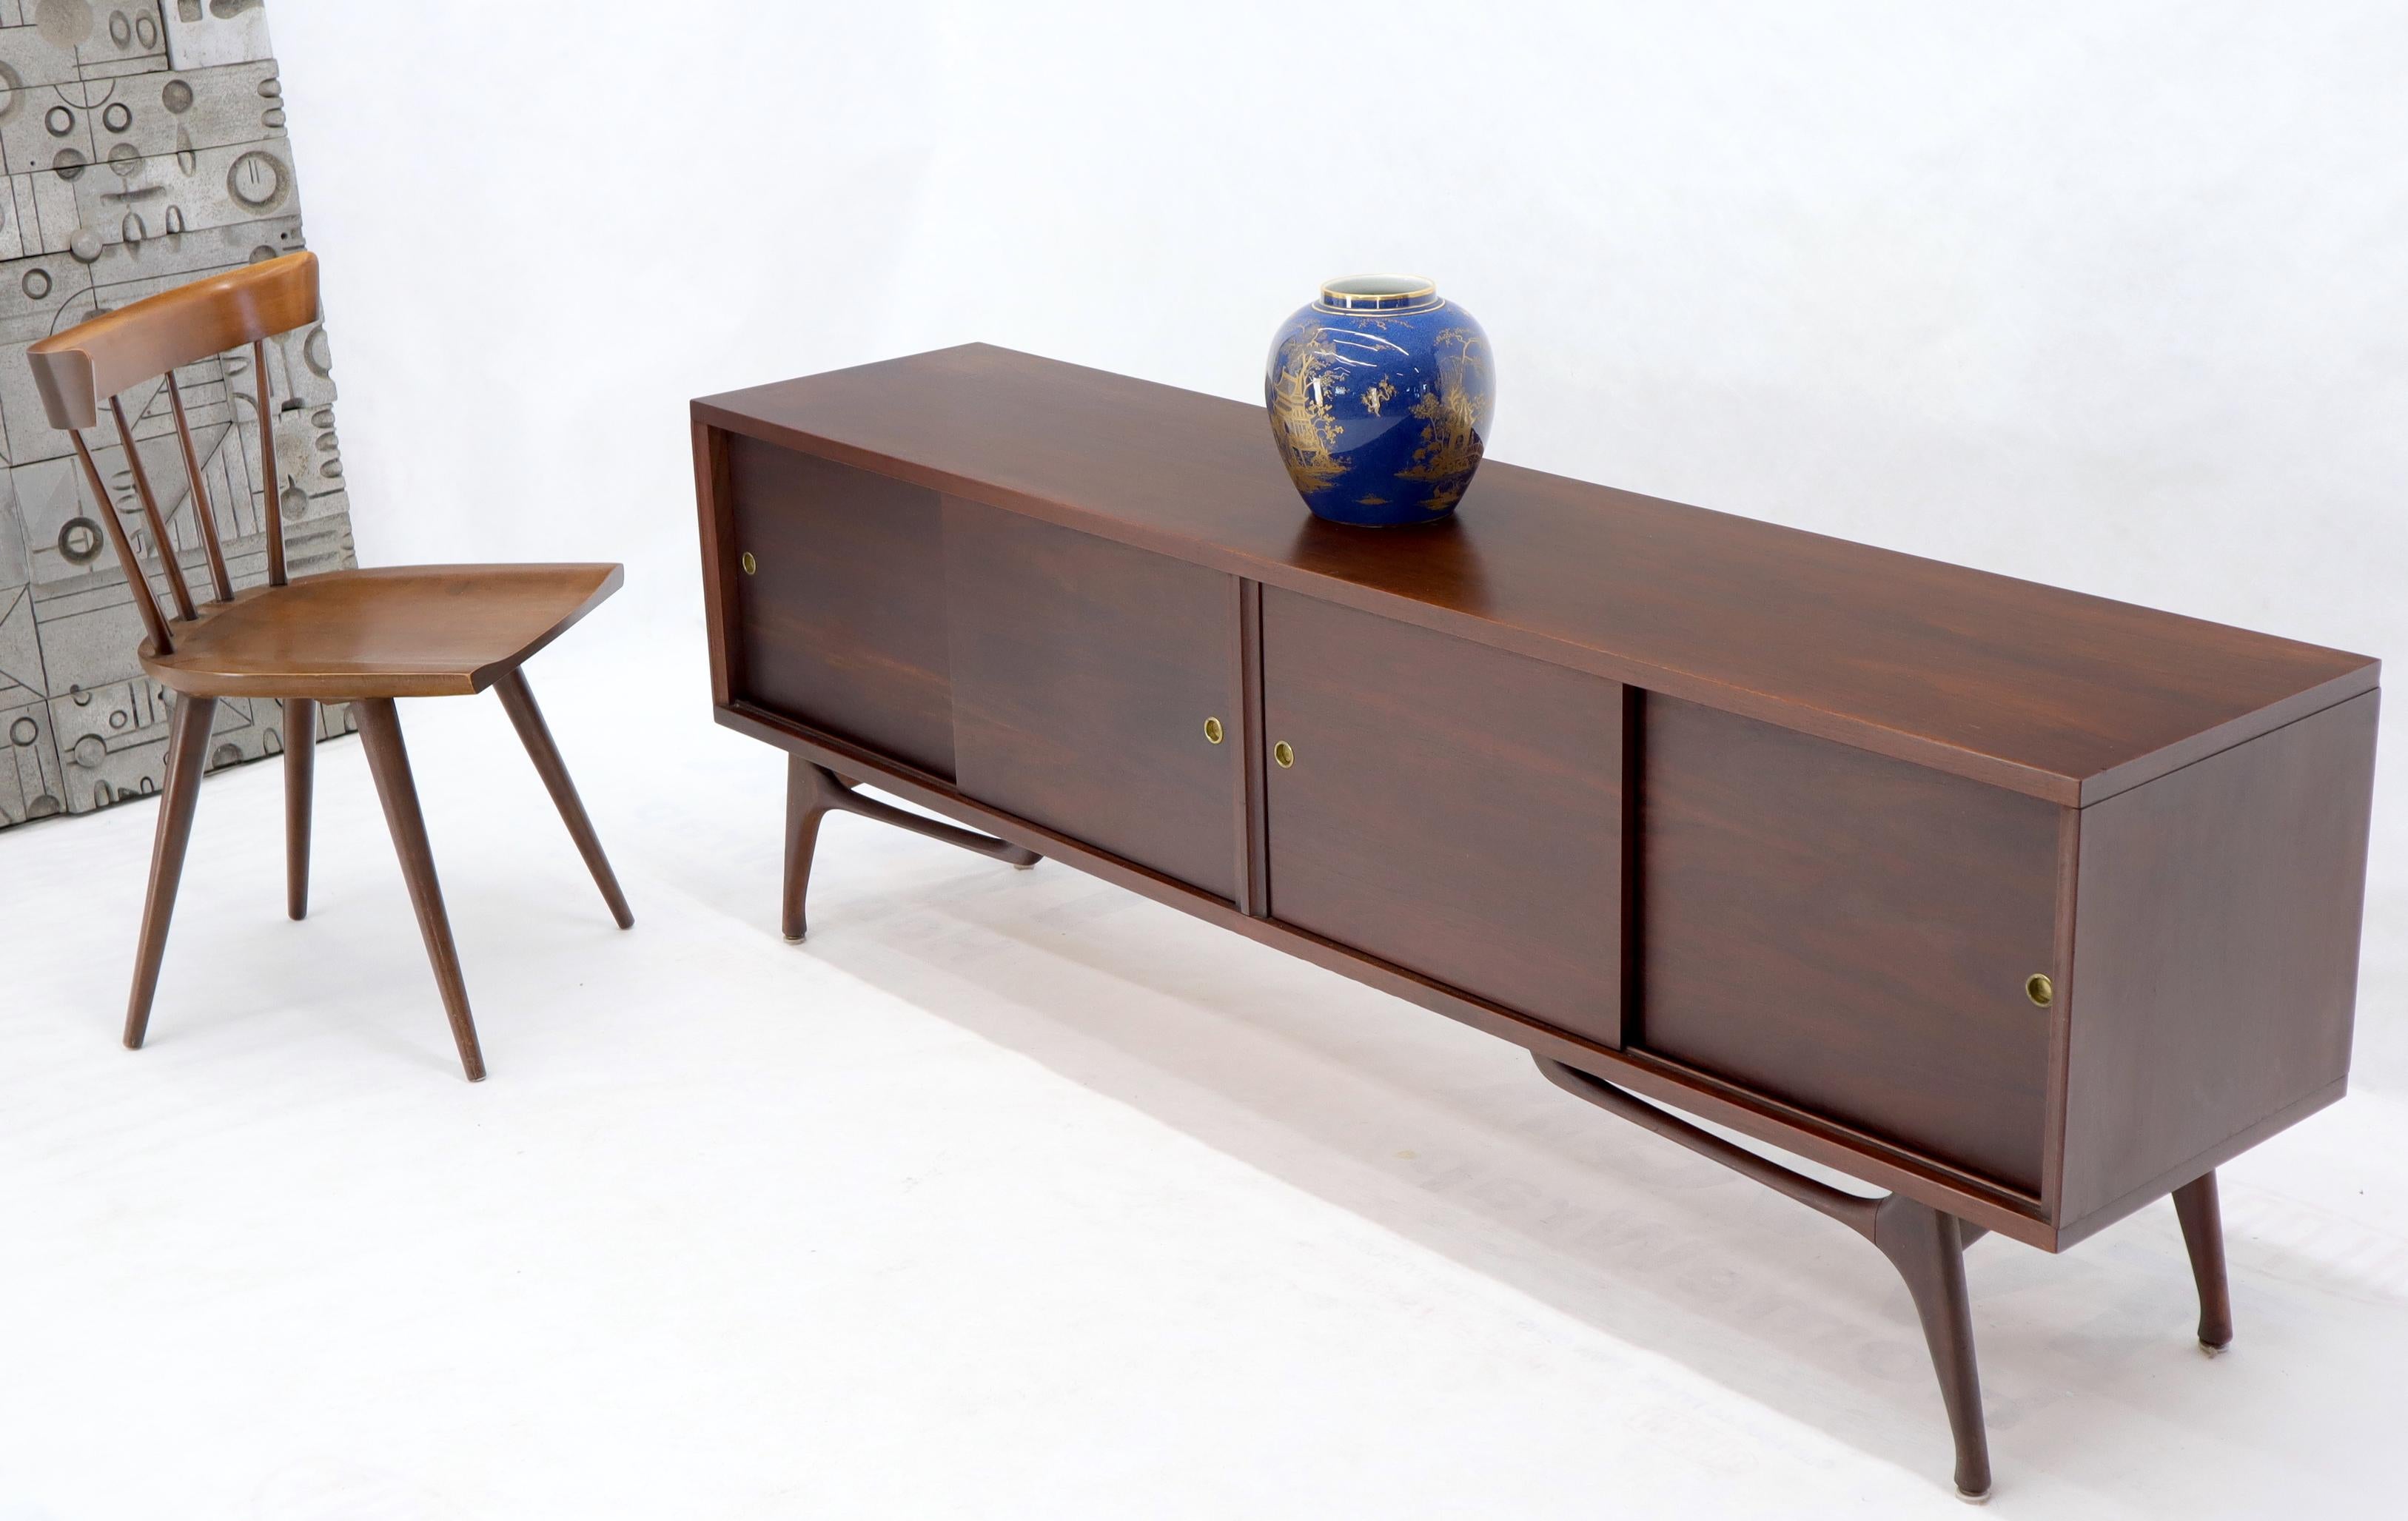 Mid-Century Modern oiled walnut finish sliding doors credenza. Standing on solid walnut sculptural legs. Excellent vintage condition. Perfect match for Kagan Pearsall decor.